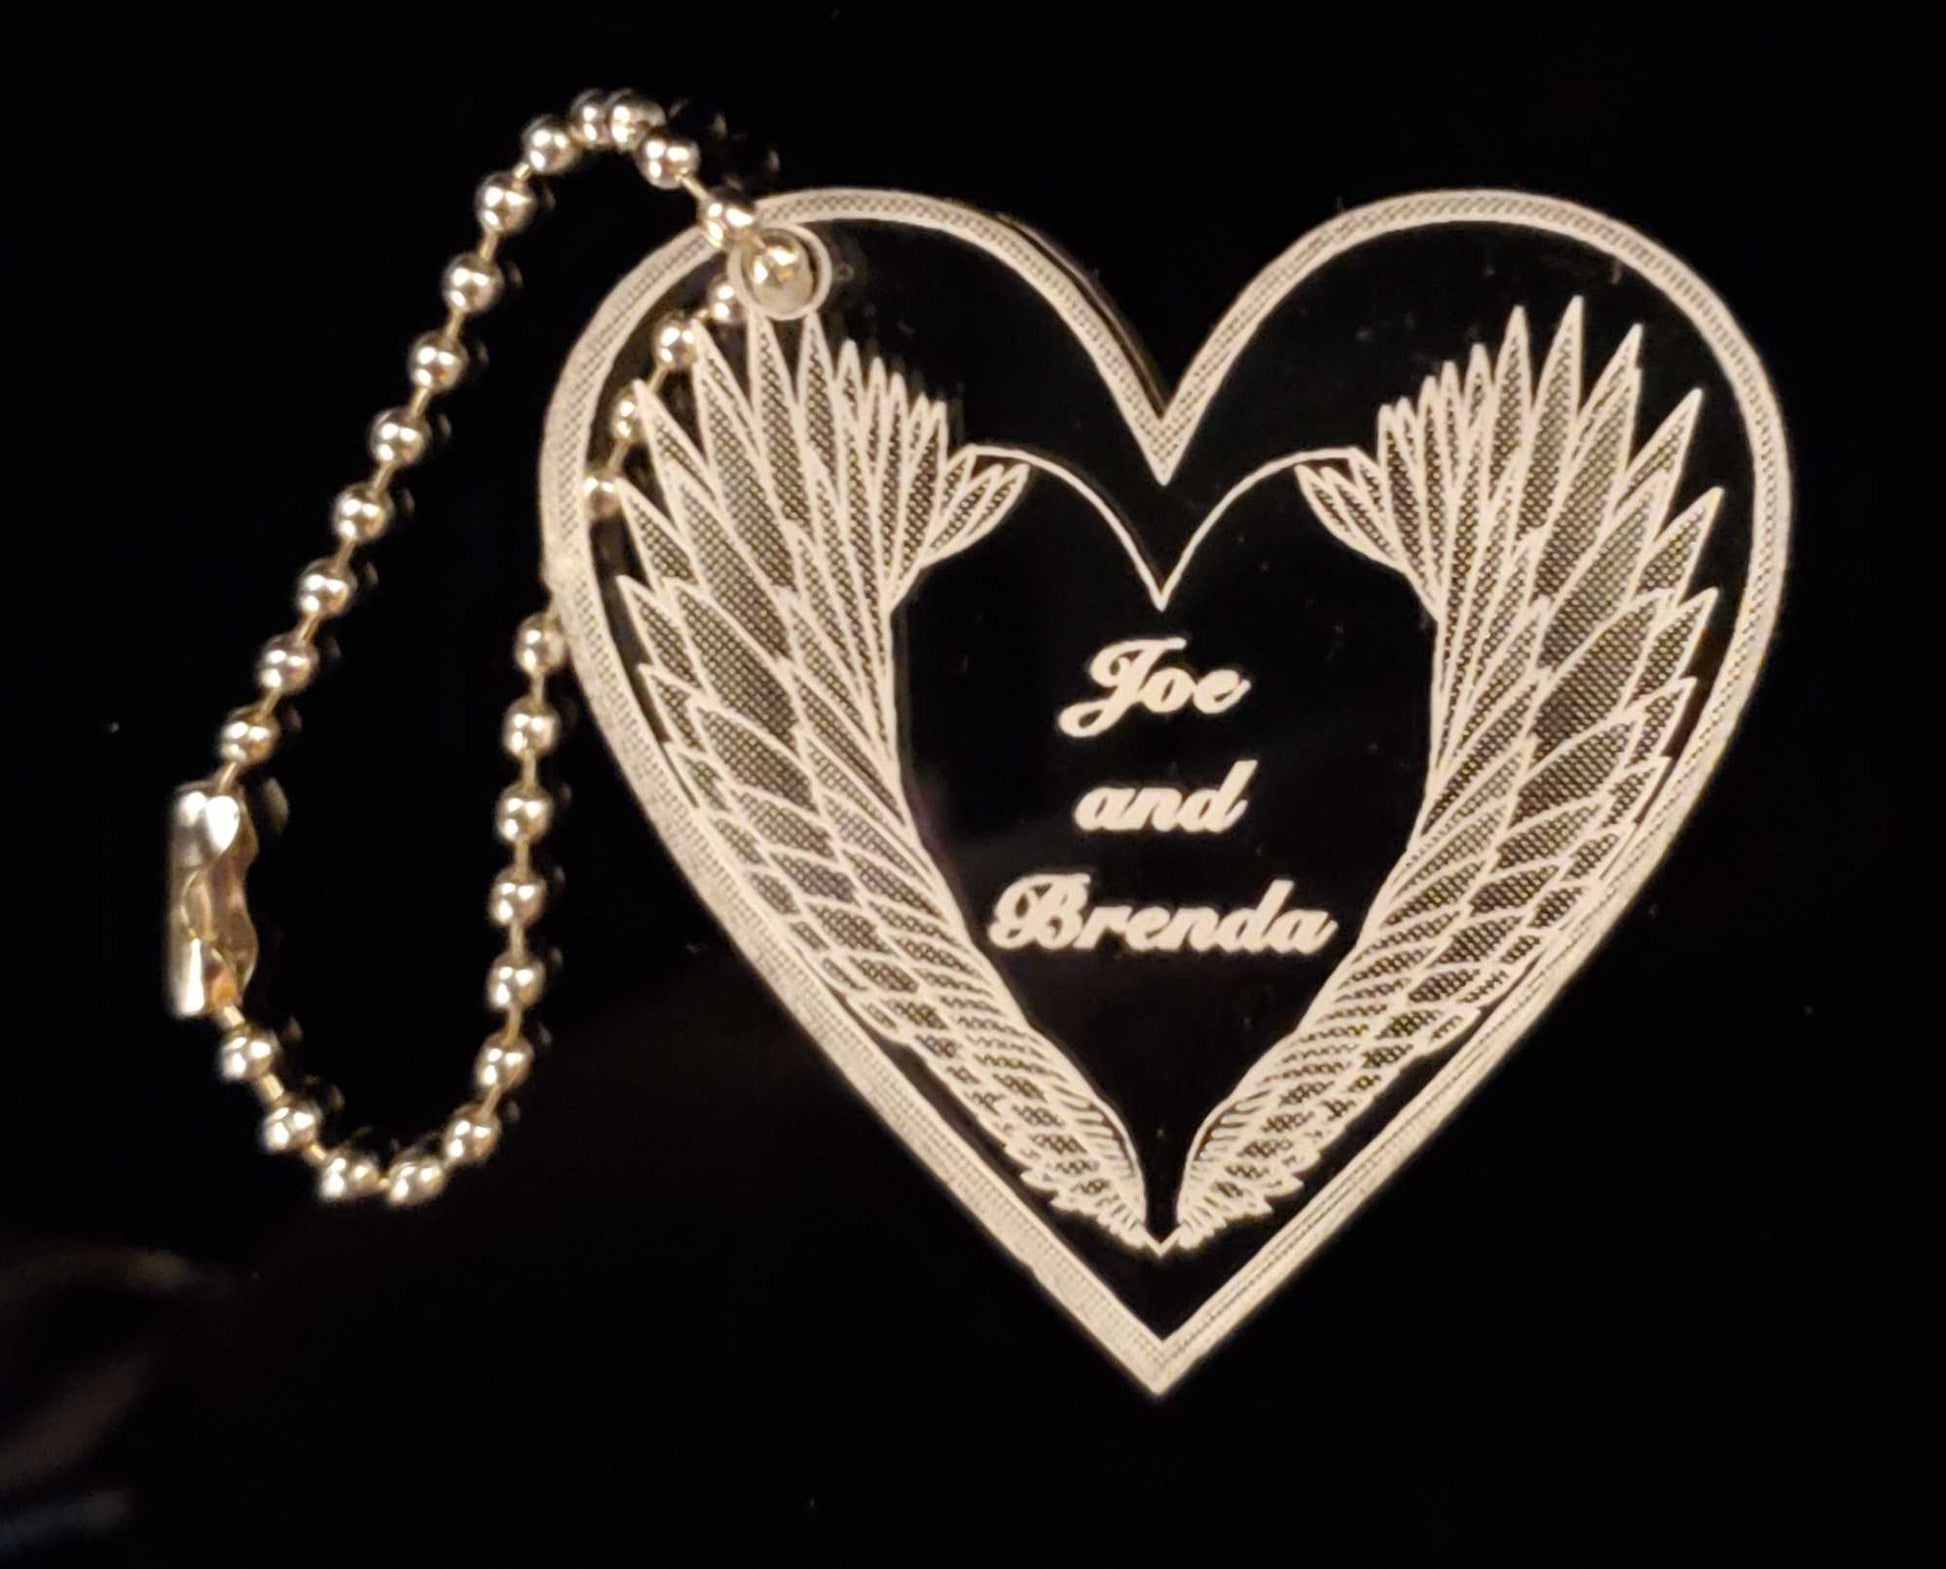 heart shaped acrylic keychain with angel wing design and engraved with names, with a small chain attached